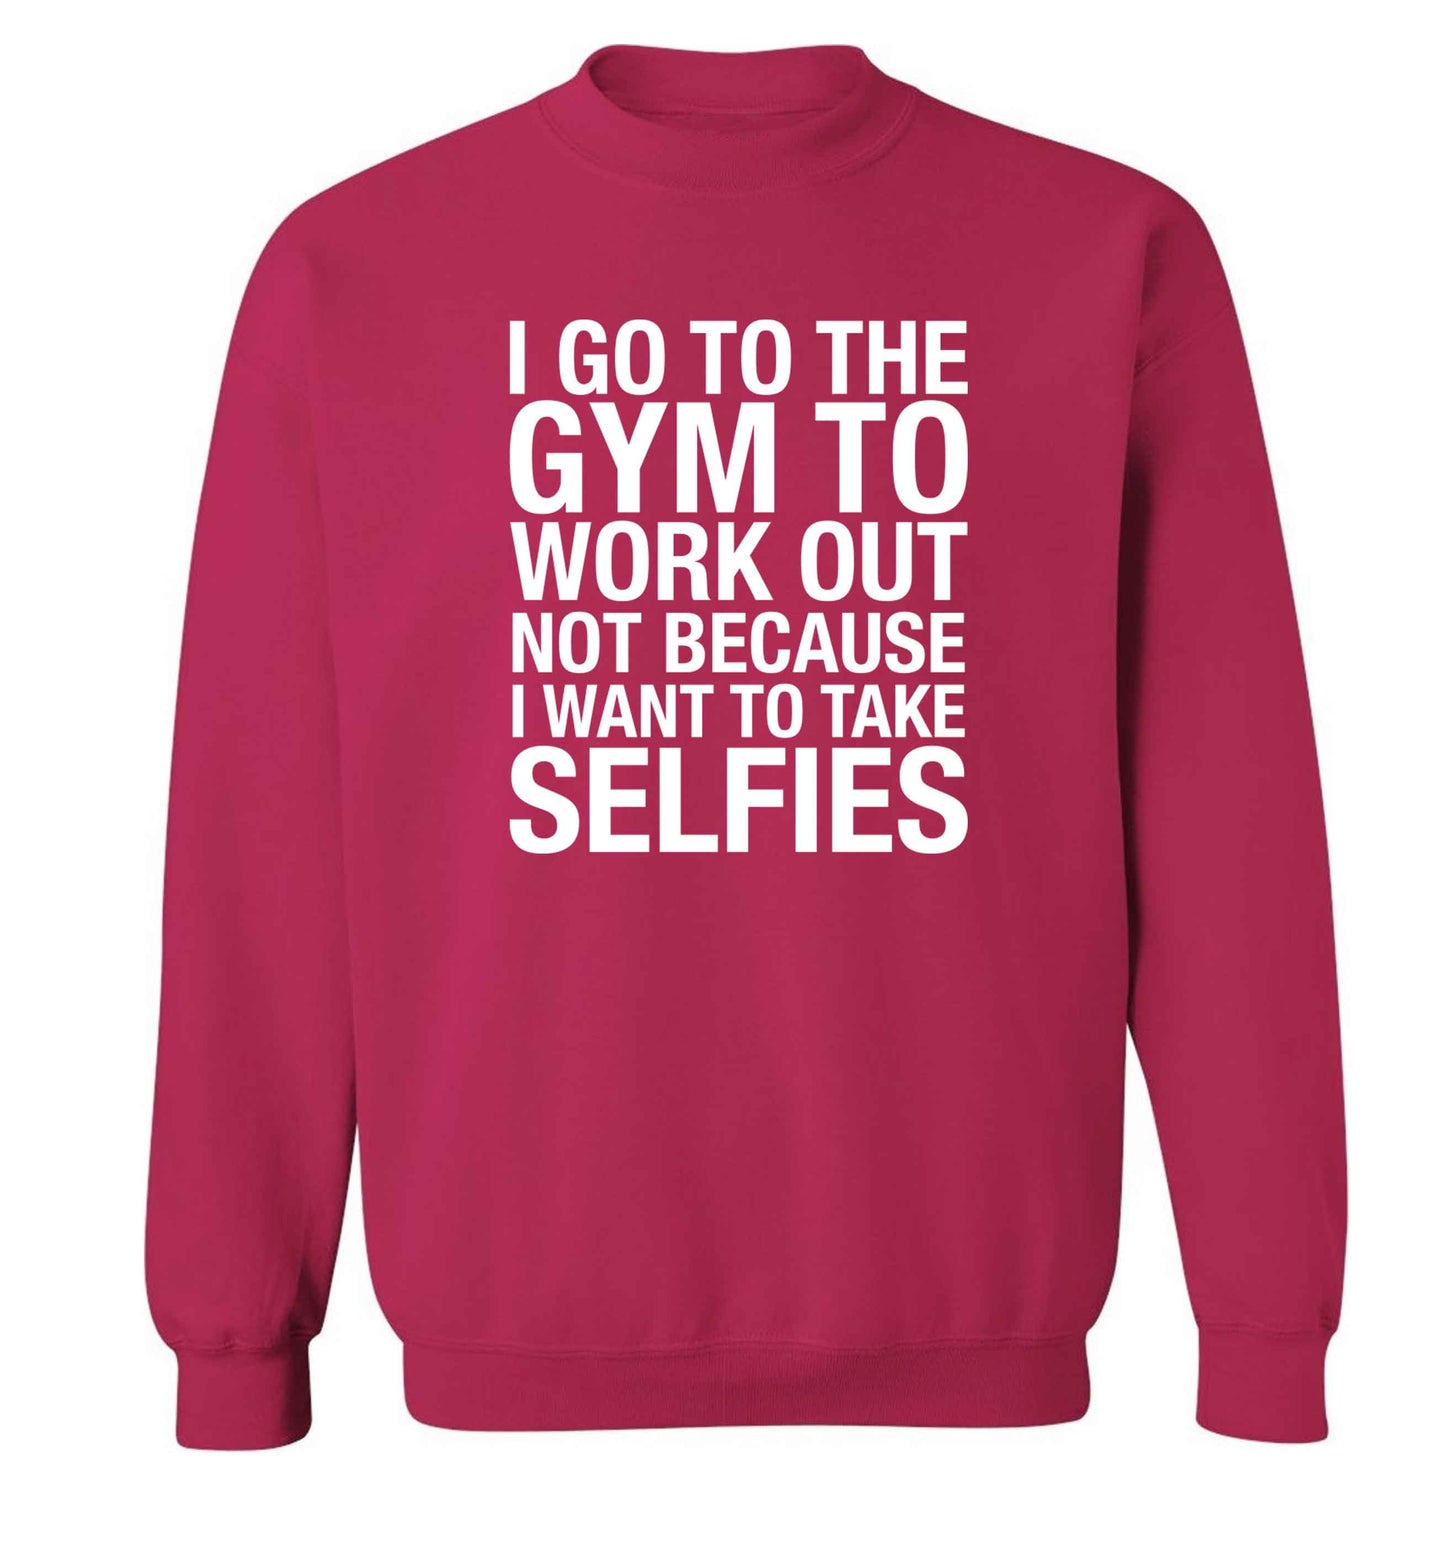 I go to the gym to workout not to take selfies adult's unisex pink sweater 2XL